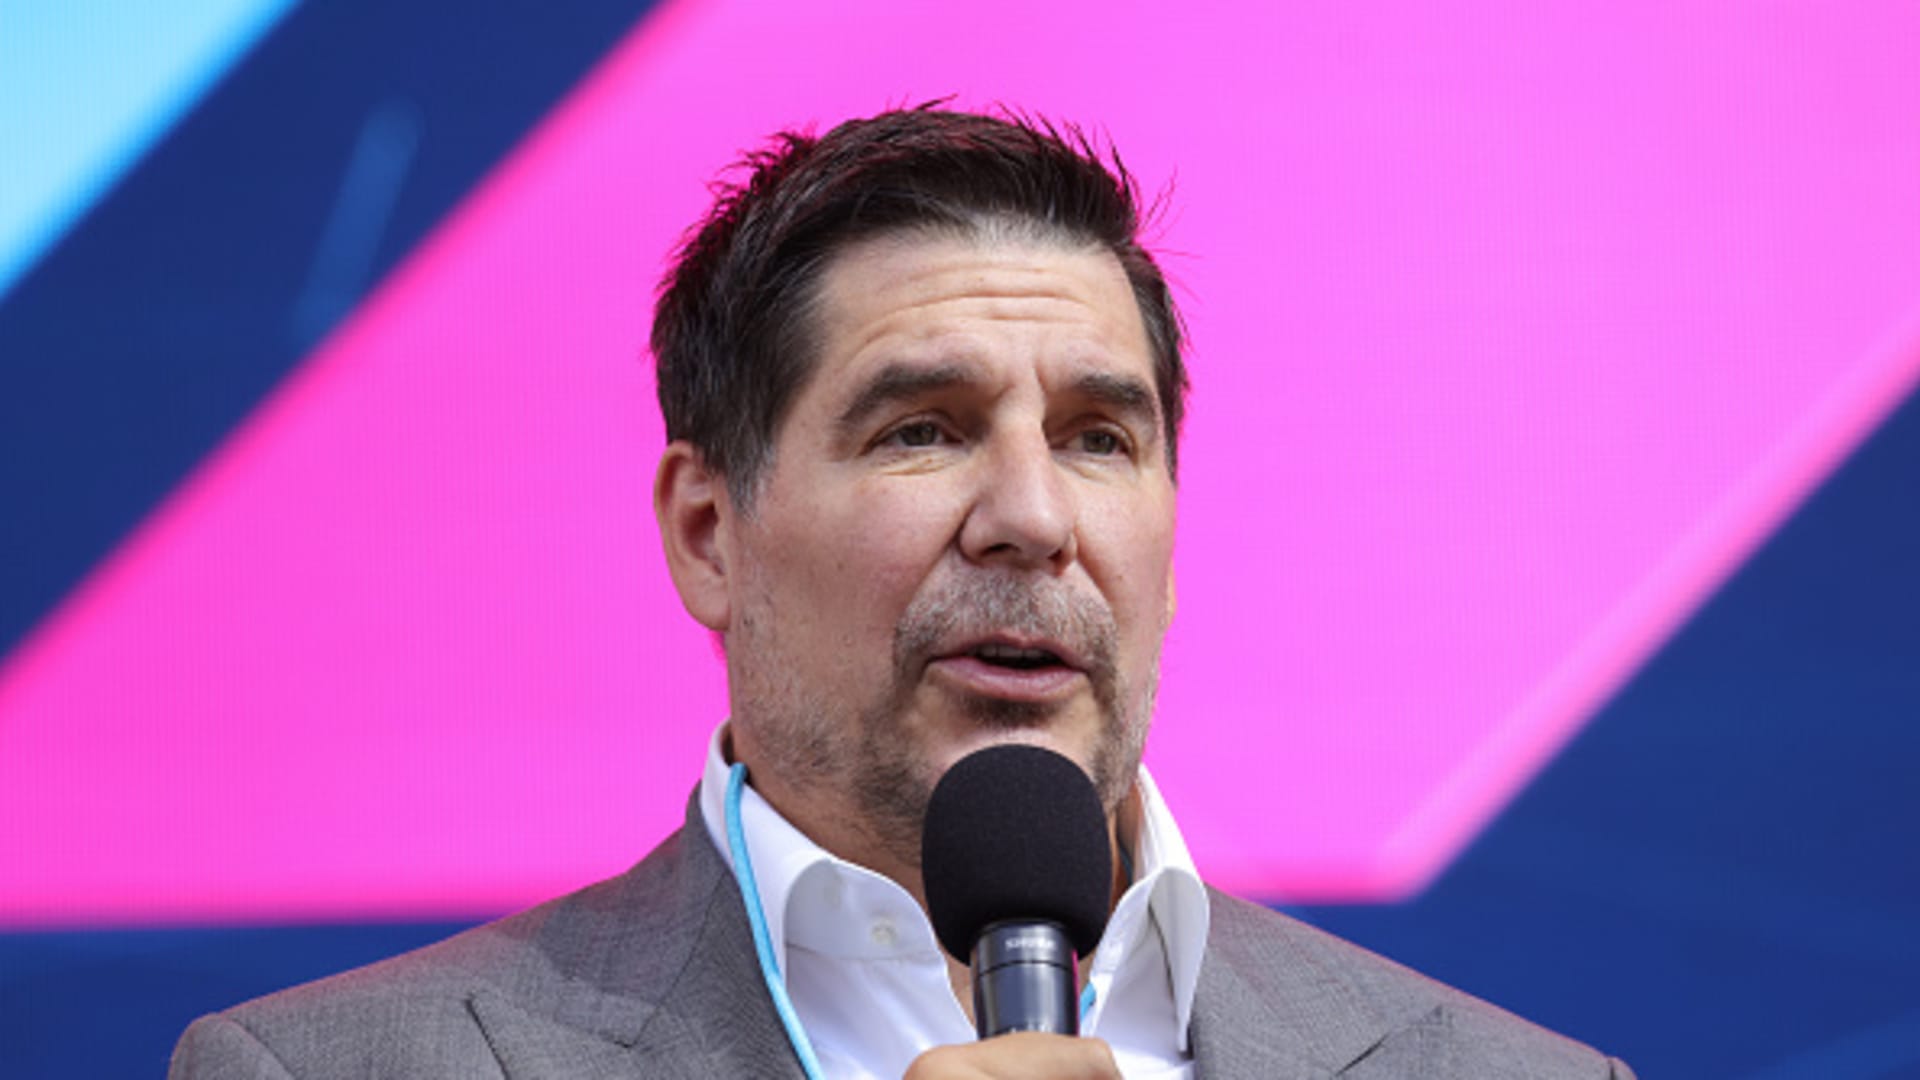 Marcelo Claure speaks on stage during the Digital X event on September 07, 2021 in Cologne, Germany.